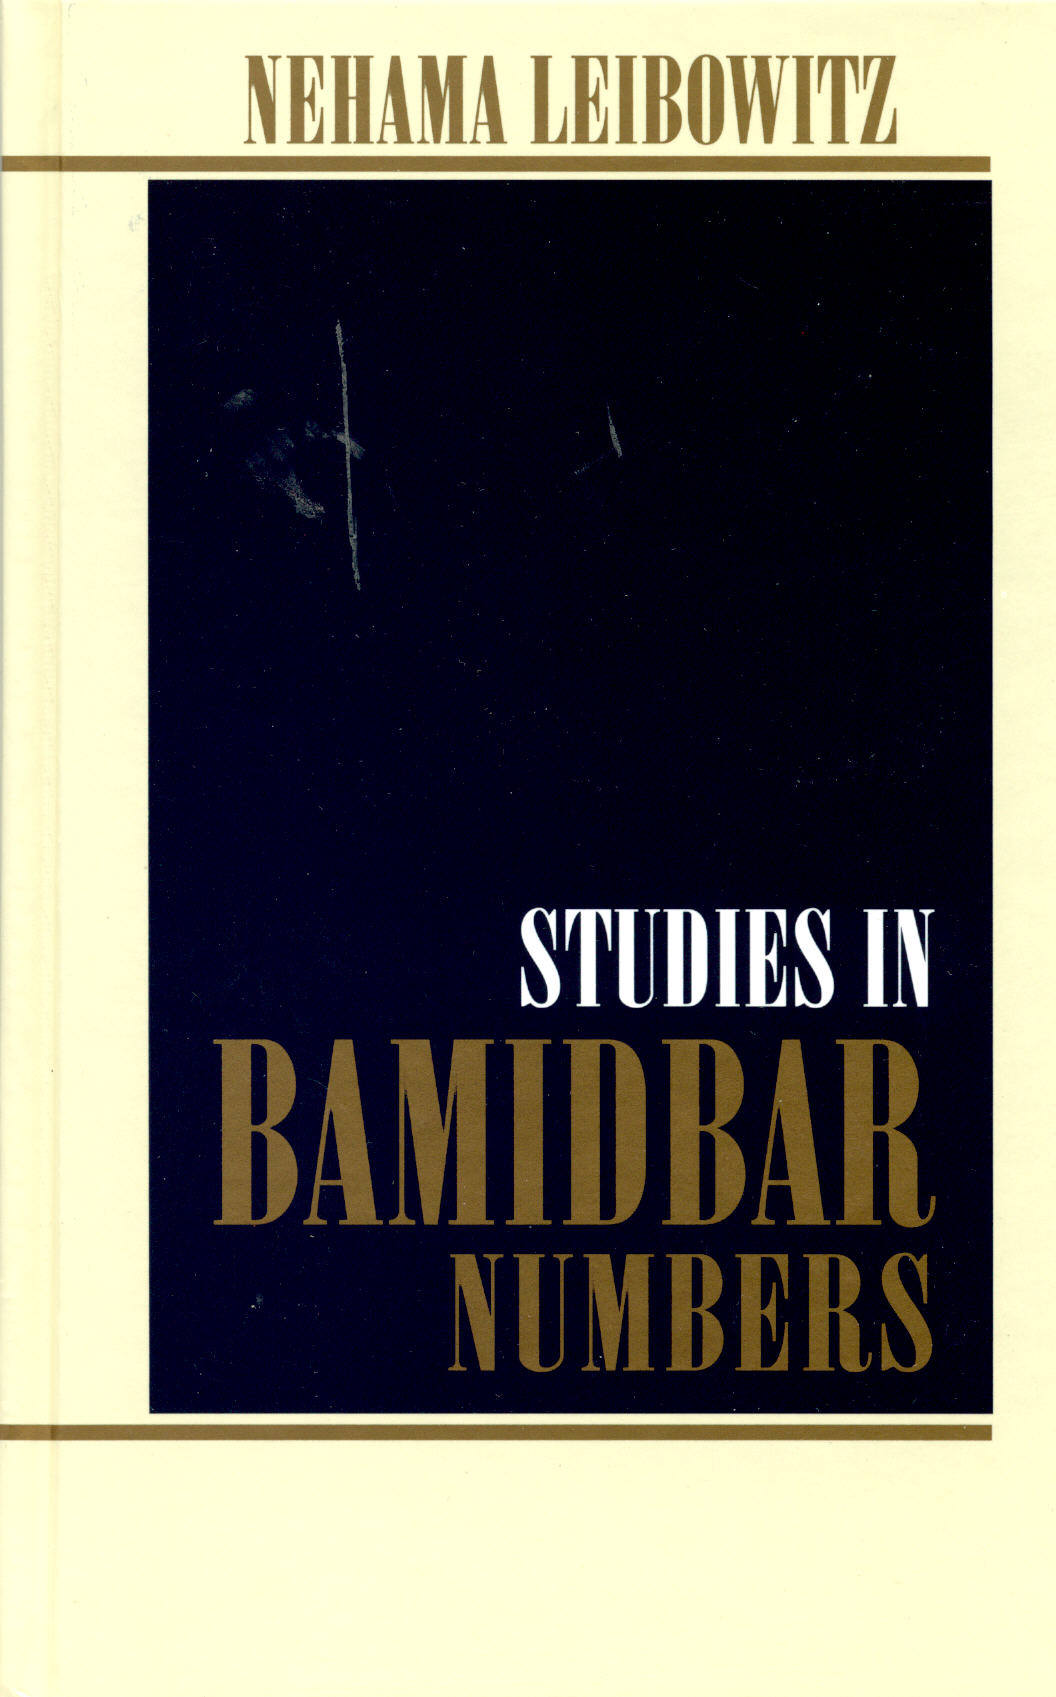 New Studies in Bamidbar (Numbers)